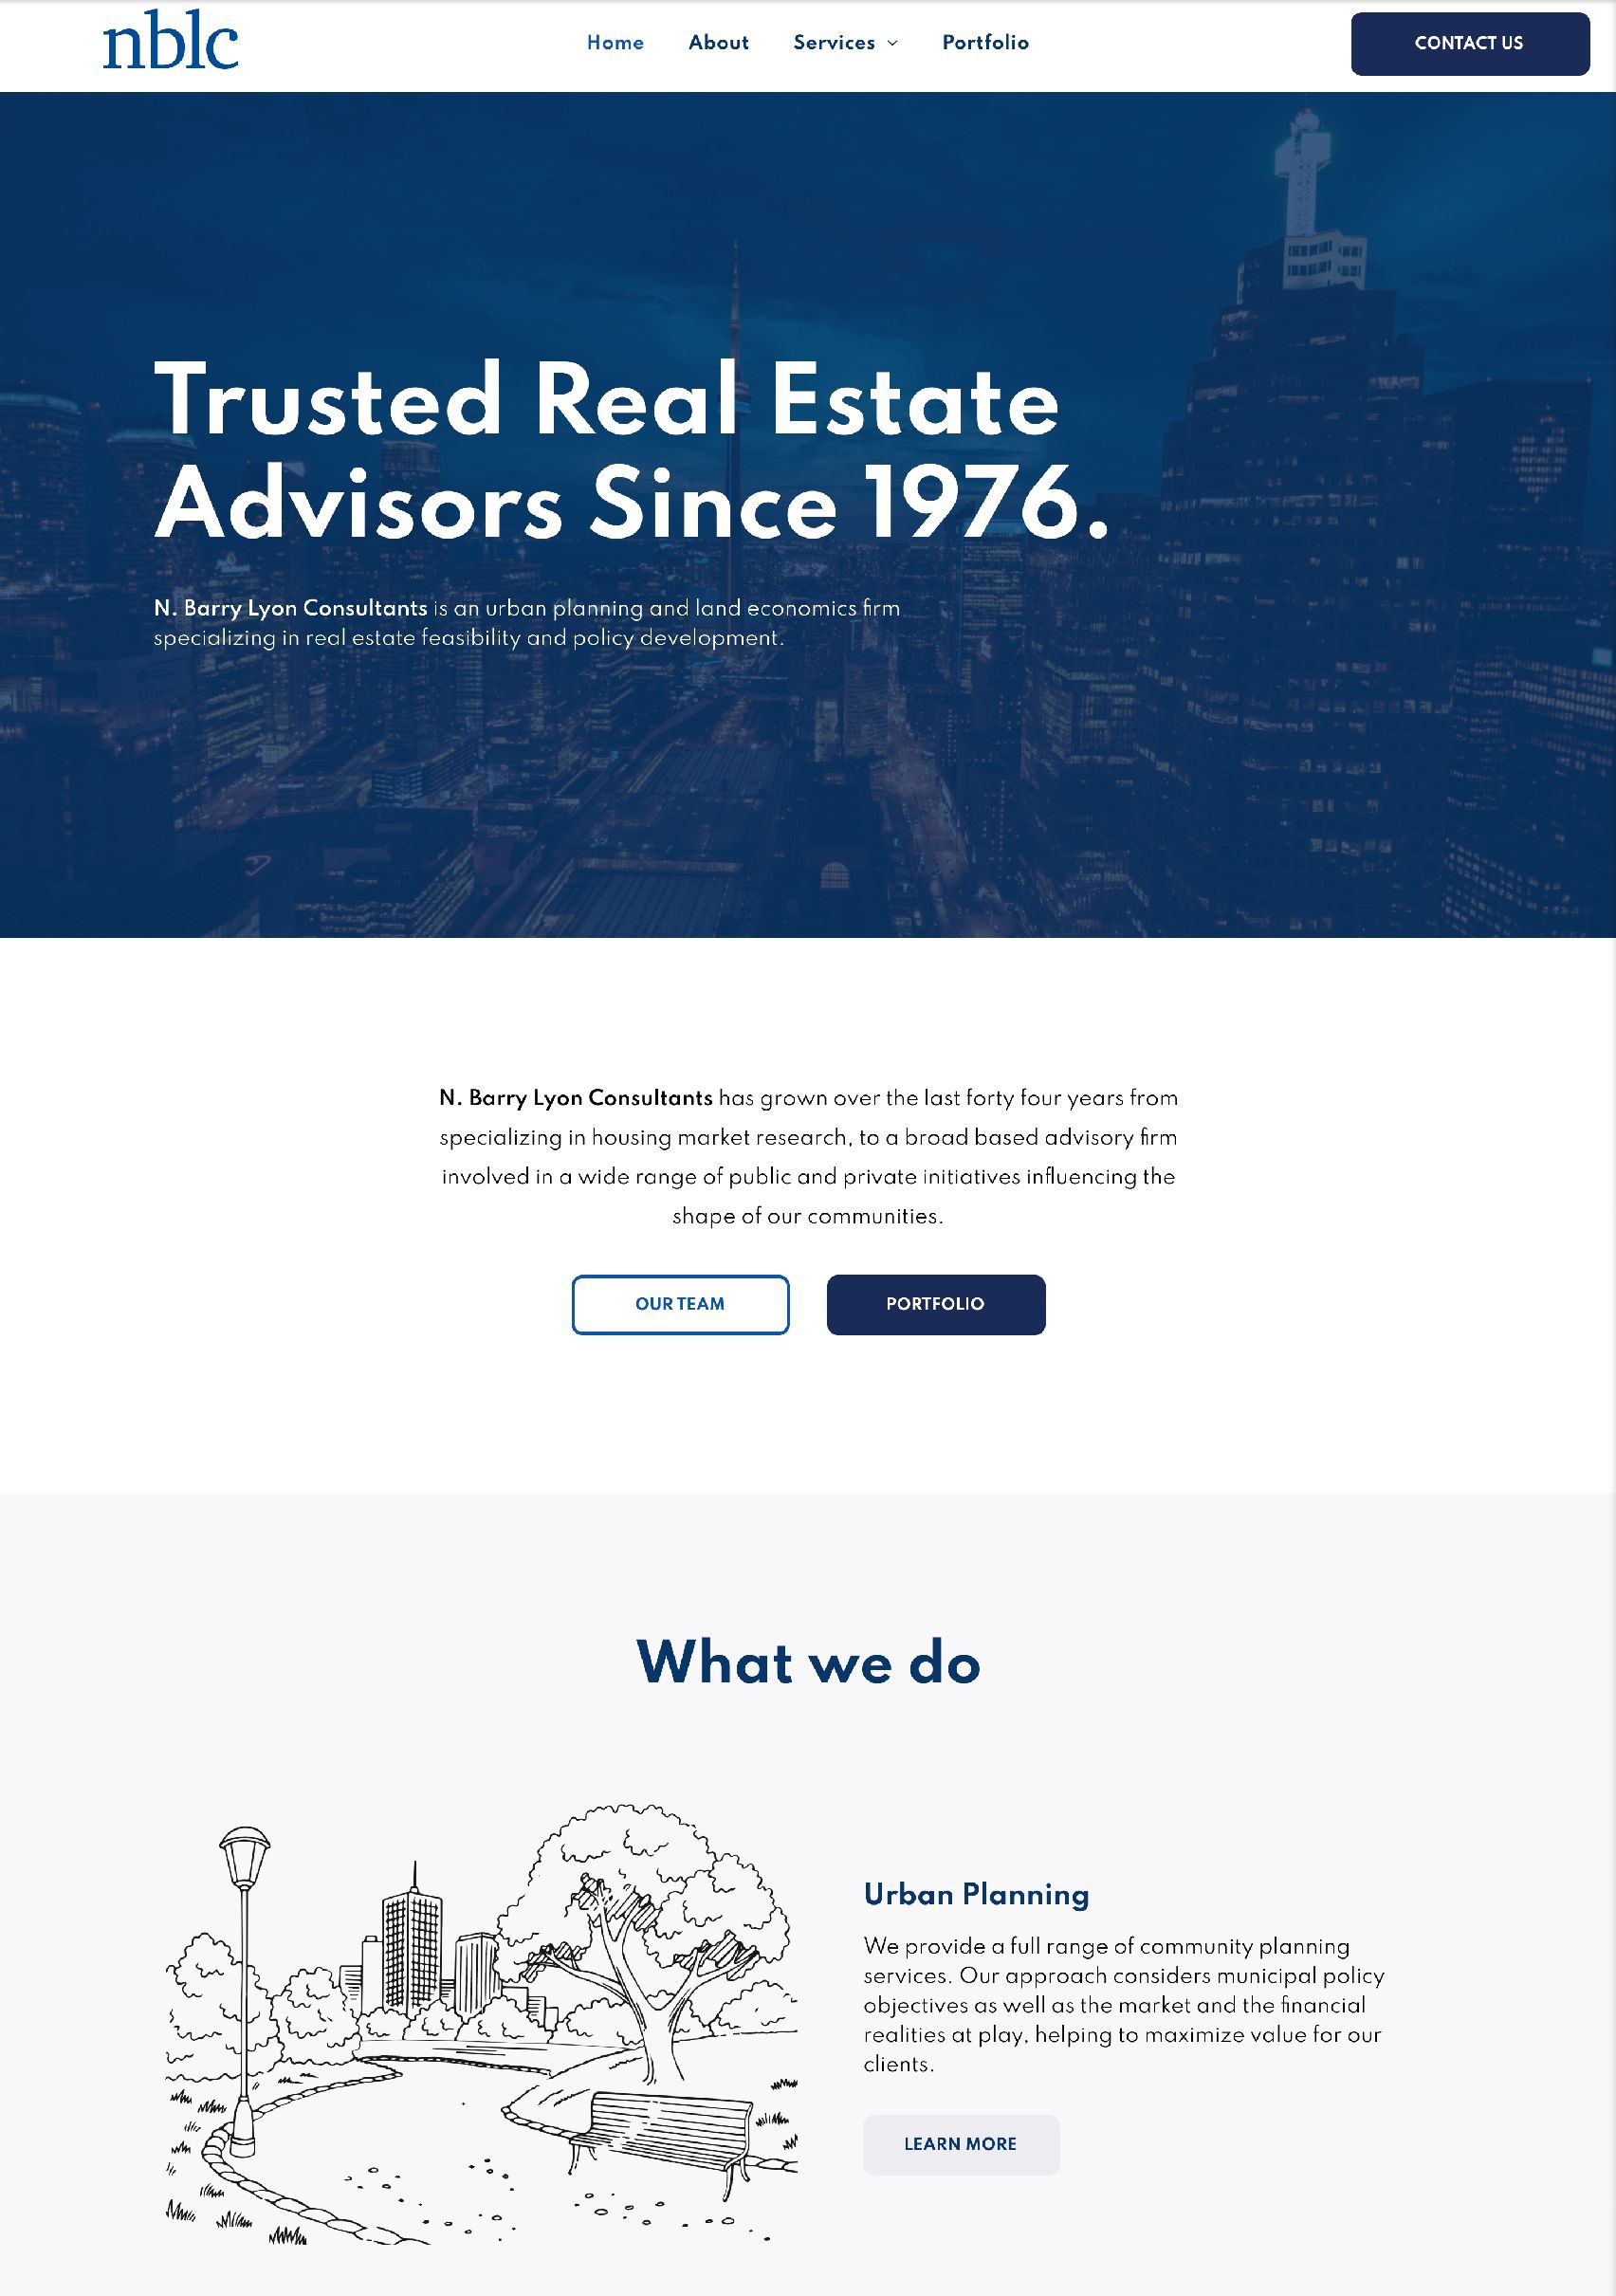 a website for NBLC trusted real estate advisors since 1976